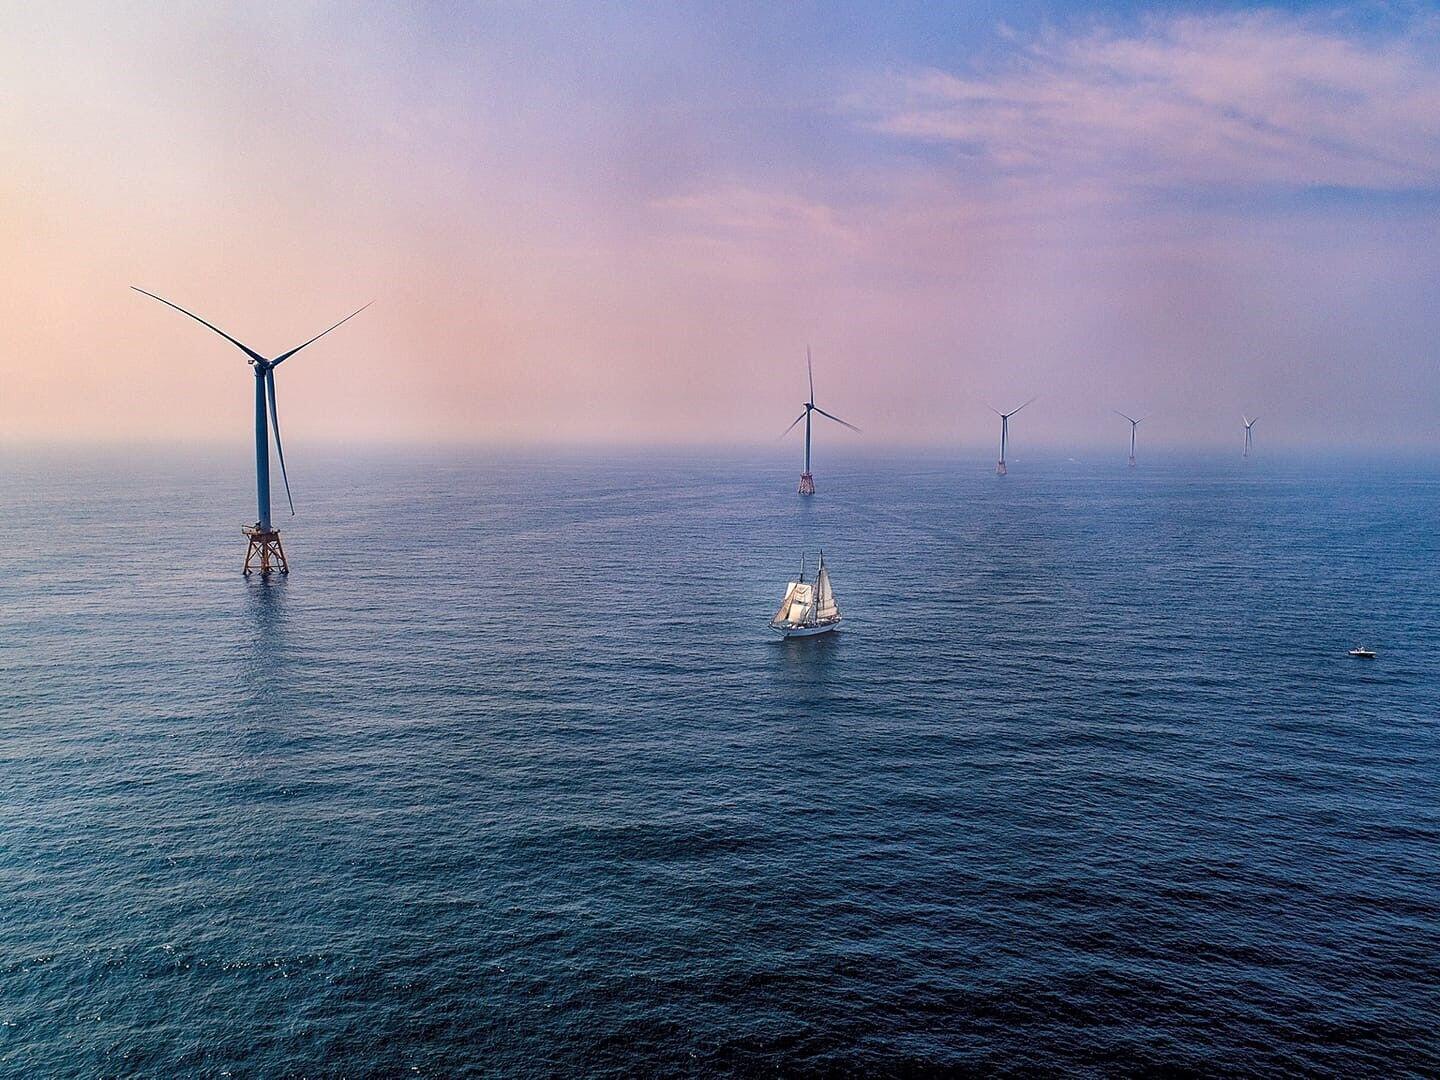 Vineyard Wind finished its first offshore wind turbine. Here's a peek